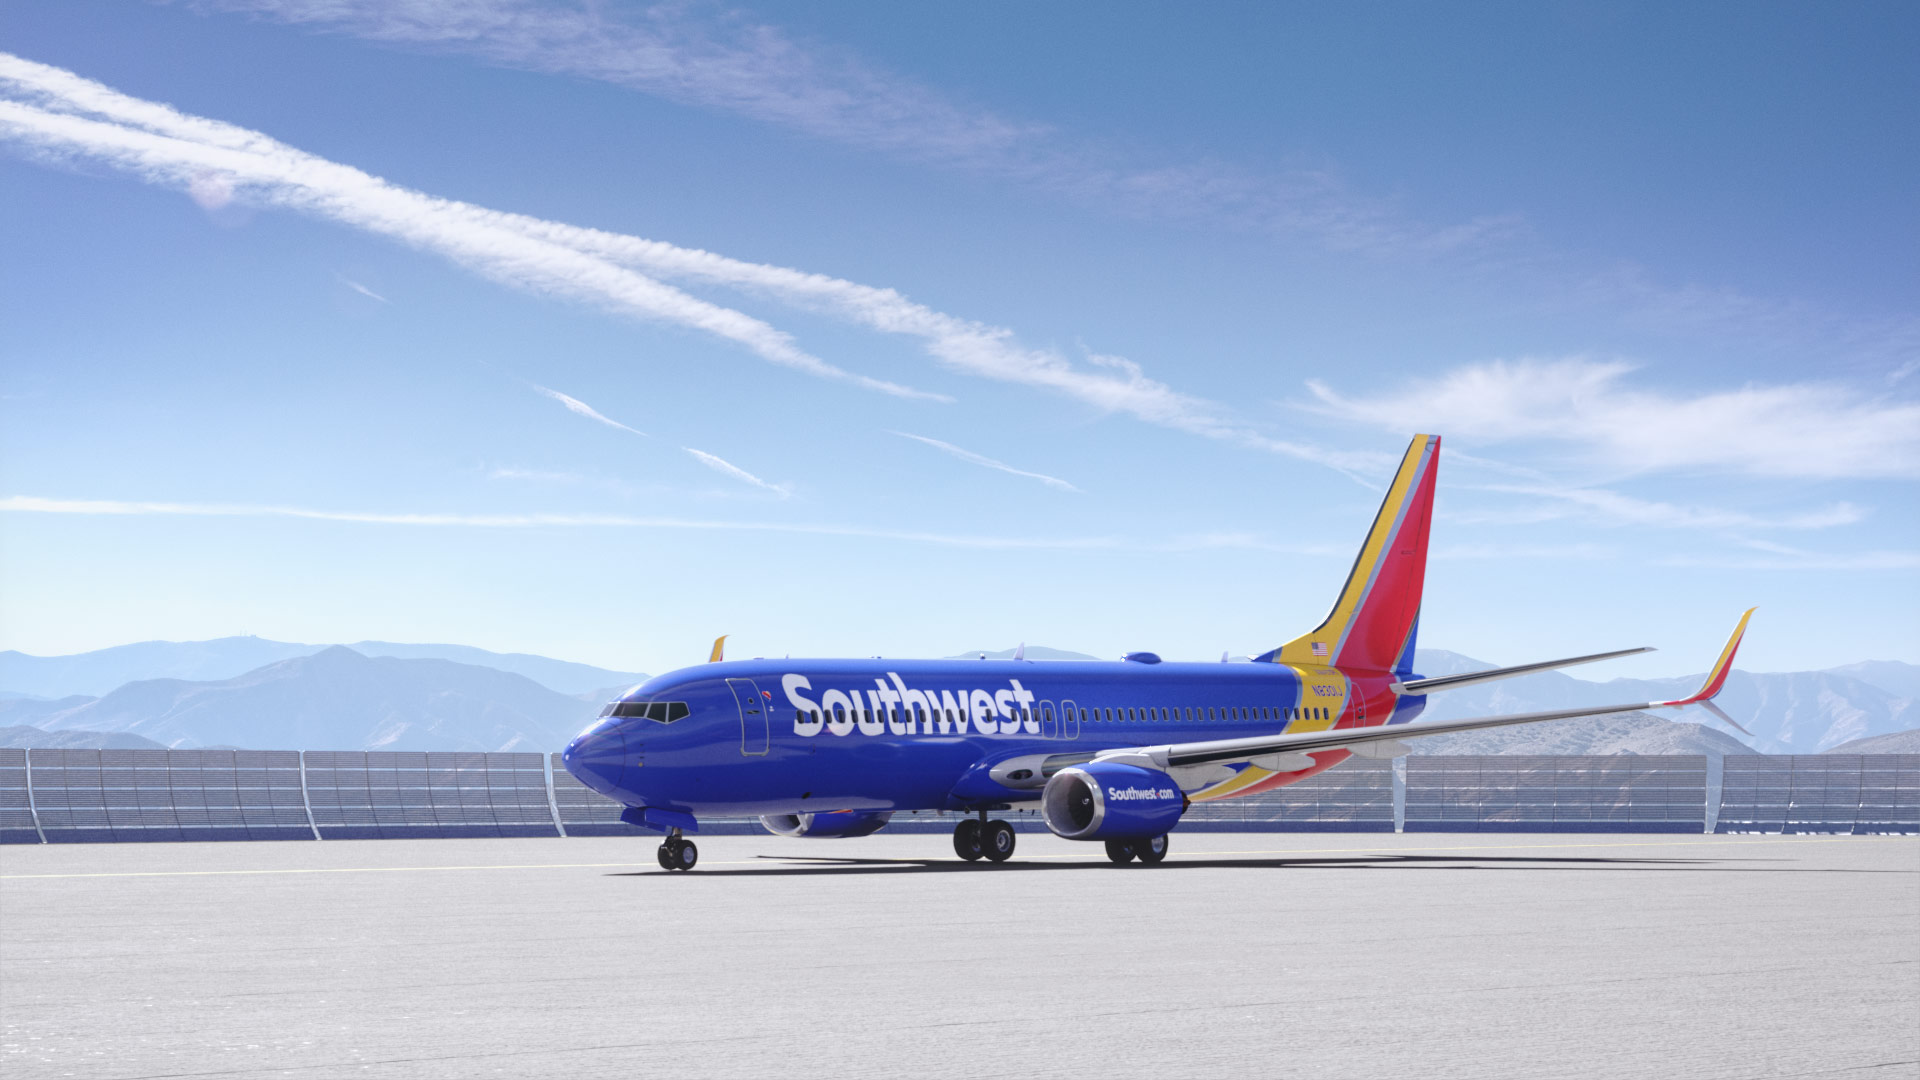 A rendering of a Southwest Airlines aircraft.